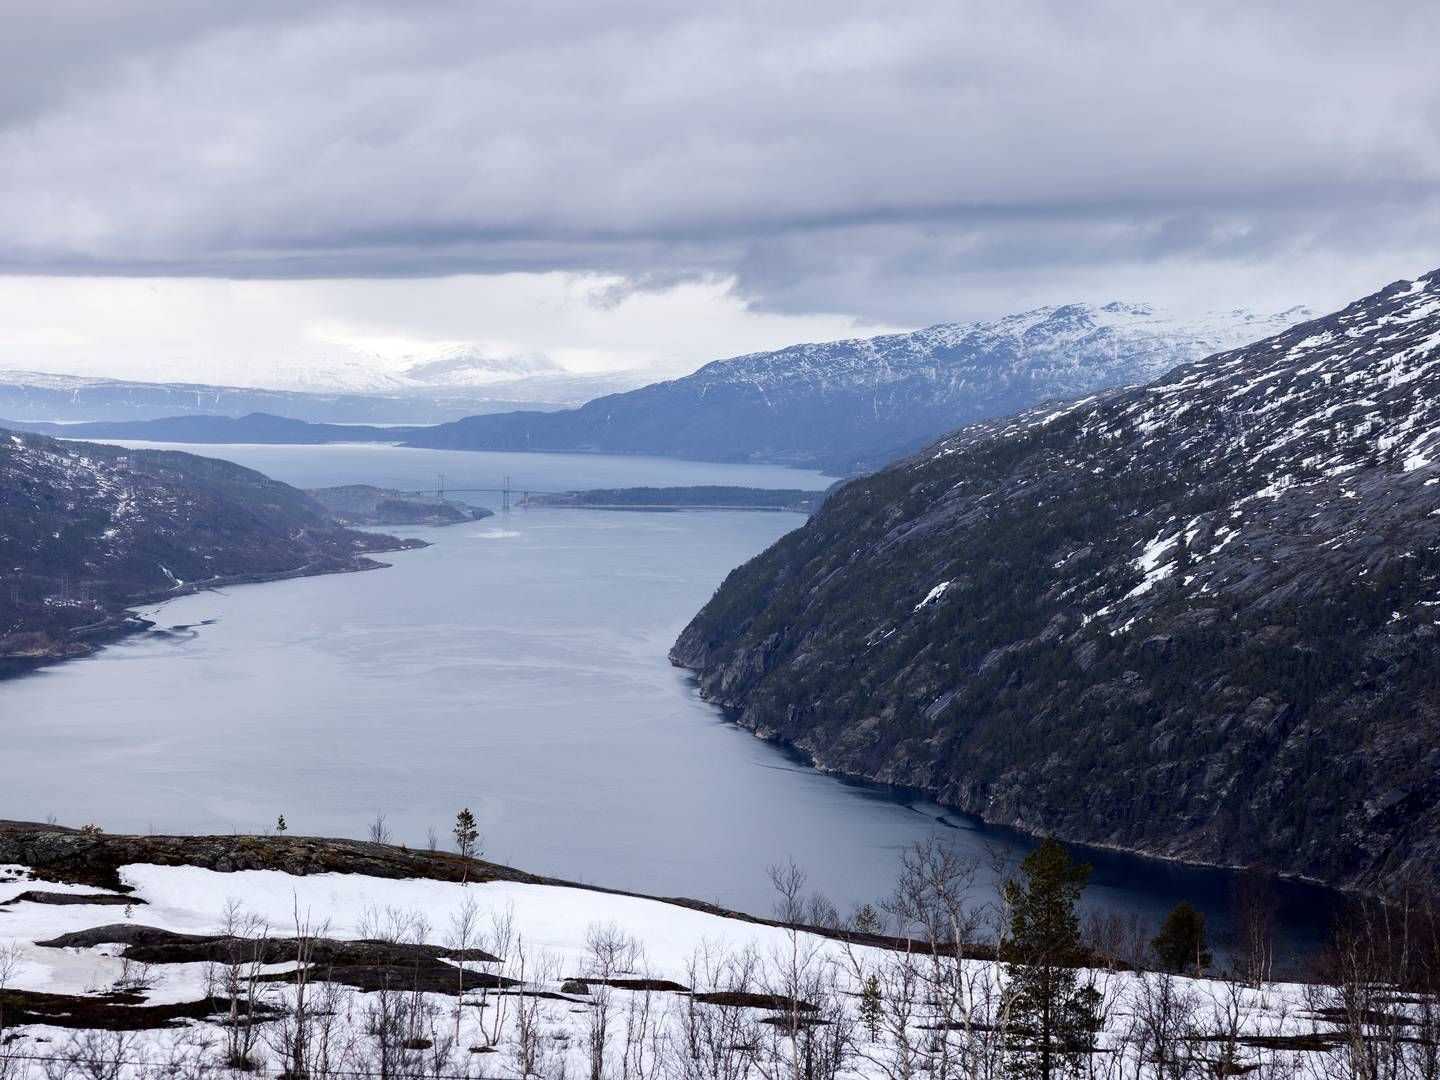 Statkraft and Aker Horizons have teamed up on an ammonia project in Narvik, Norway. | Photo: Thomas Borberg